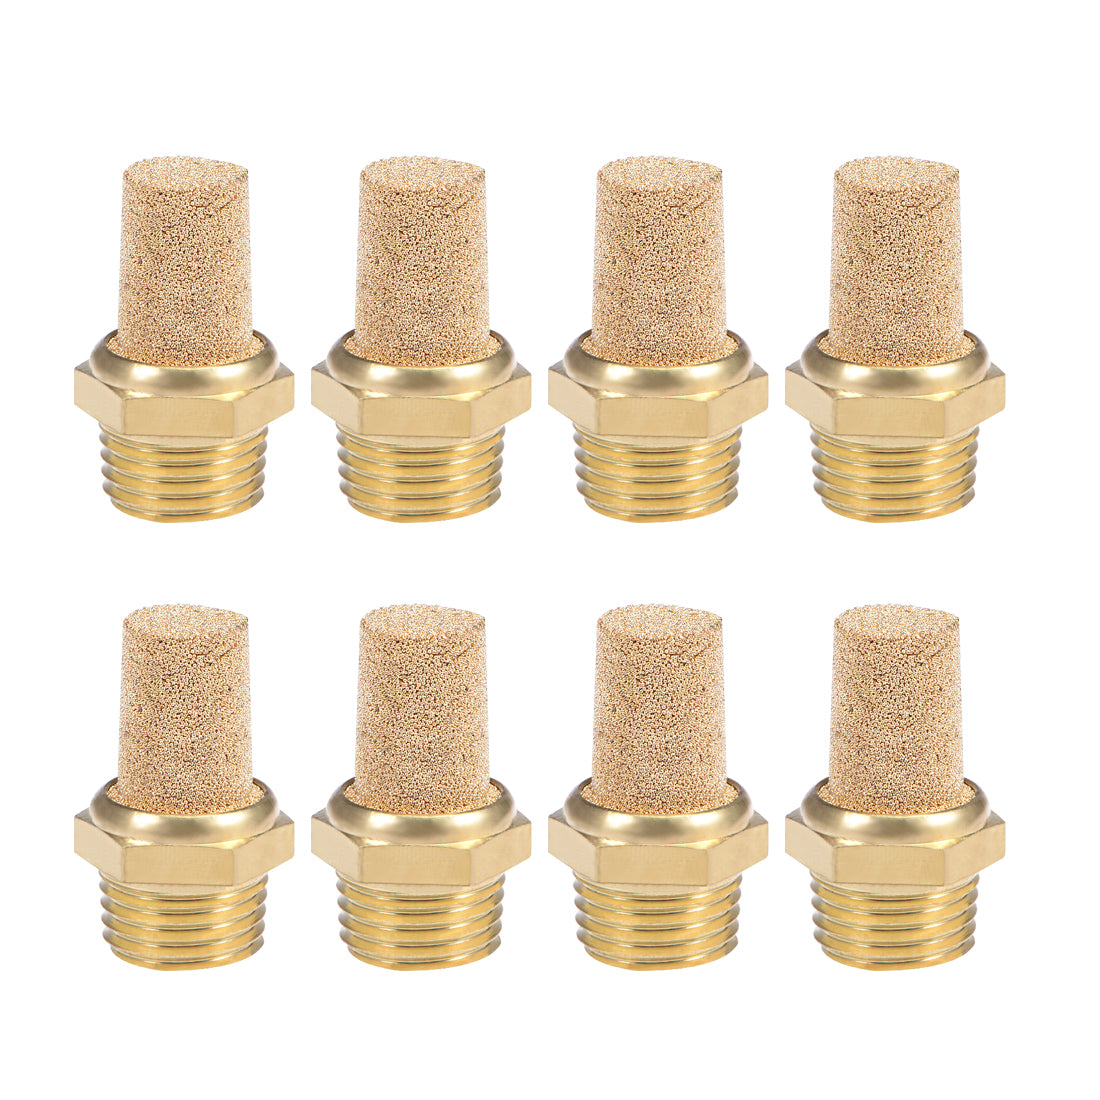 uxcell Uxcell 1/4 PT Sintered Bronze Exhaust Muffler with Brass Body Protruding 8pcs